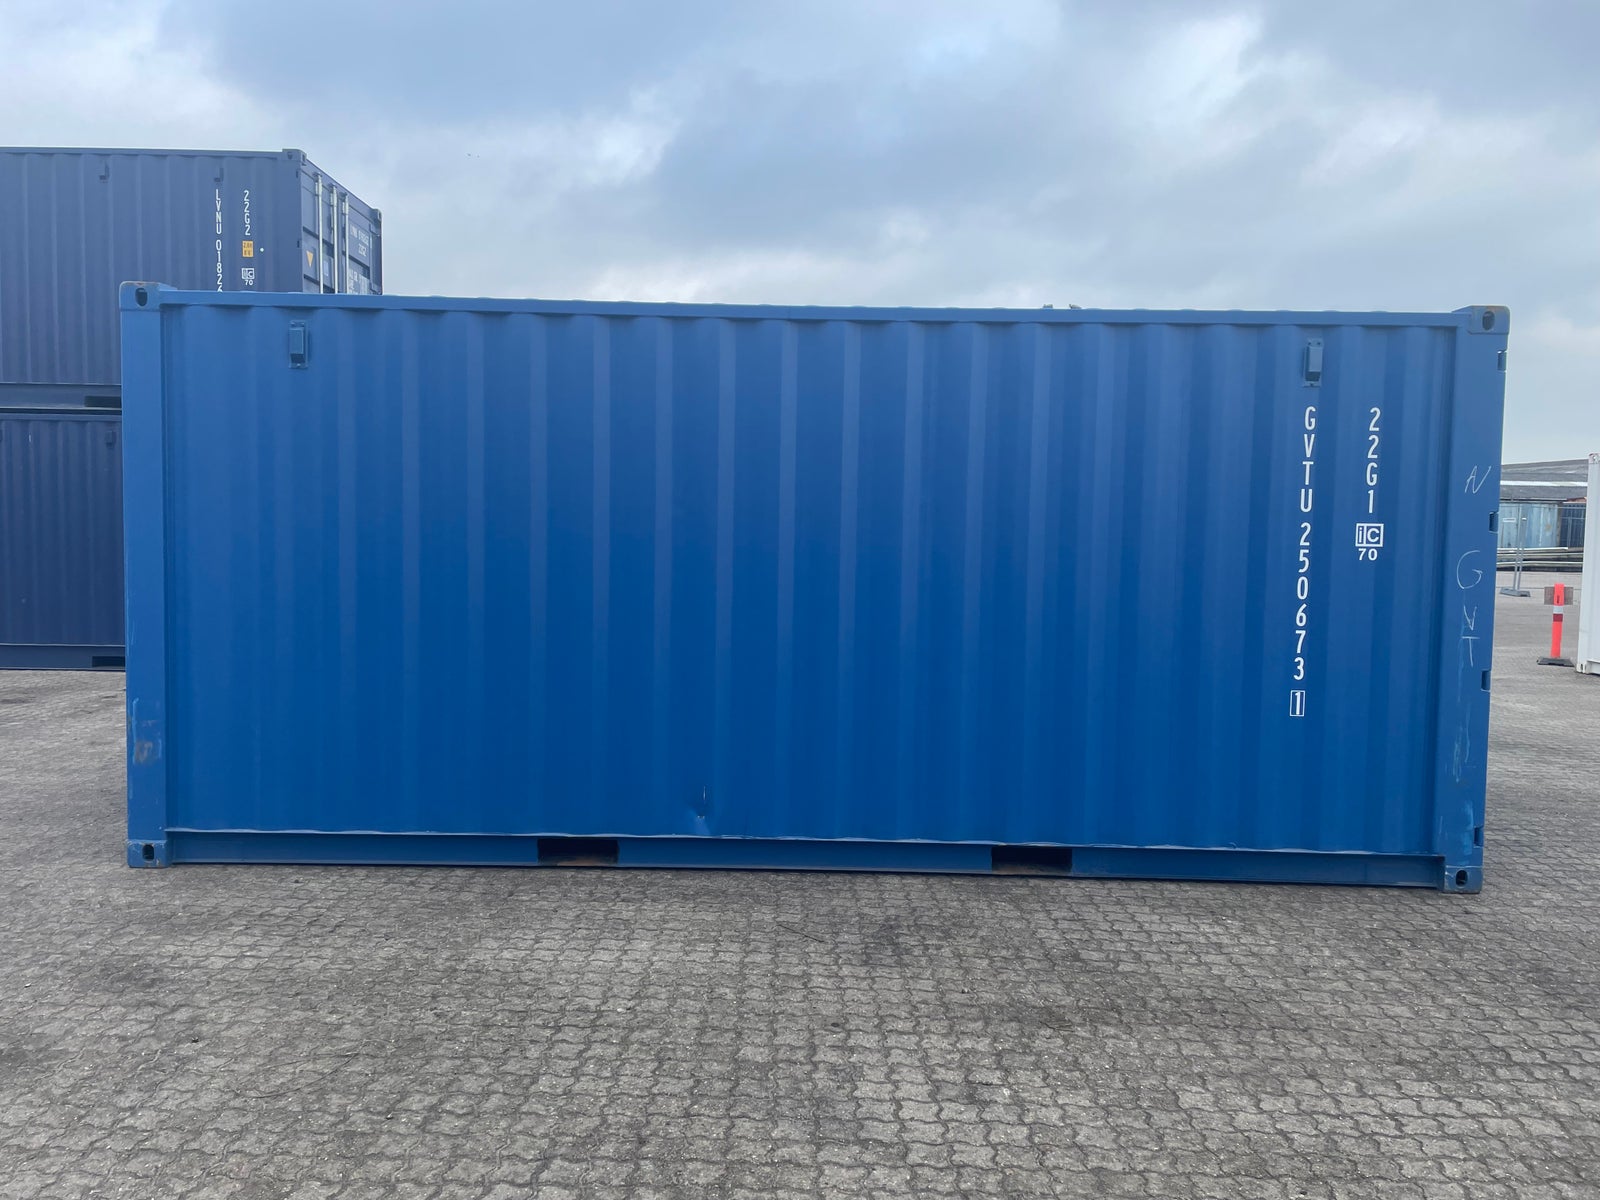 Ny 20 fods Container i Blå, andre farver haves